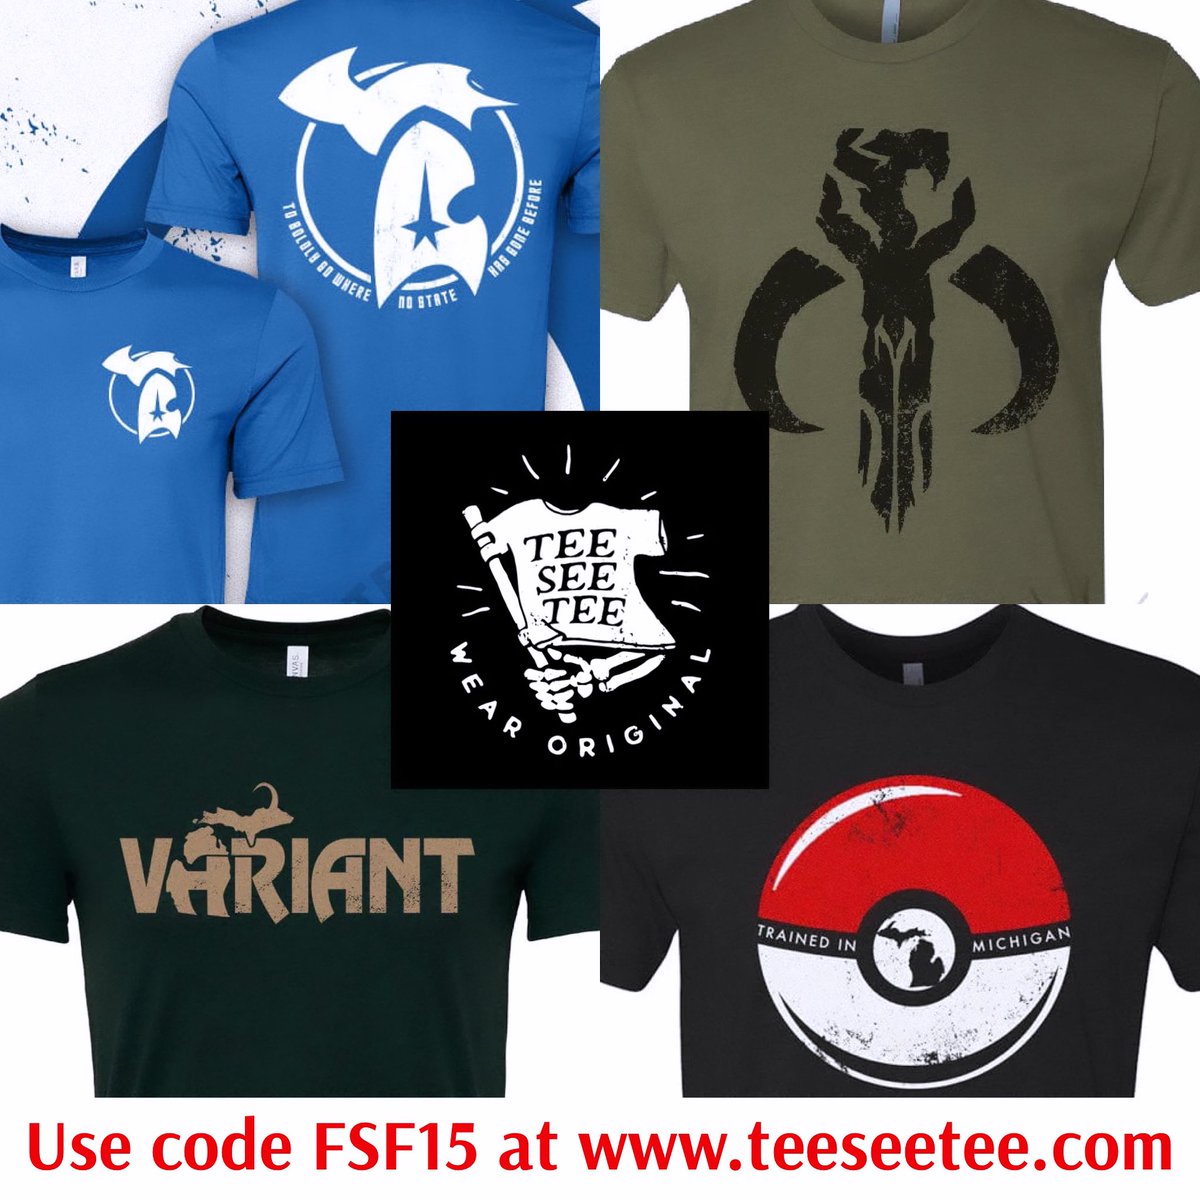 New show partner - Tee See Tees! Use code FSF15 at checkout ( teeseetee.com ) to get yourself some awesome nerd merch! They have #starwars #startrek #drwho and more! #tshirt #hoodie #nerdmerch #merch #podcast #showsponsor #partner #podcast #fsfpopcast #scifi #fantasy